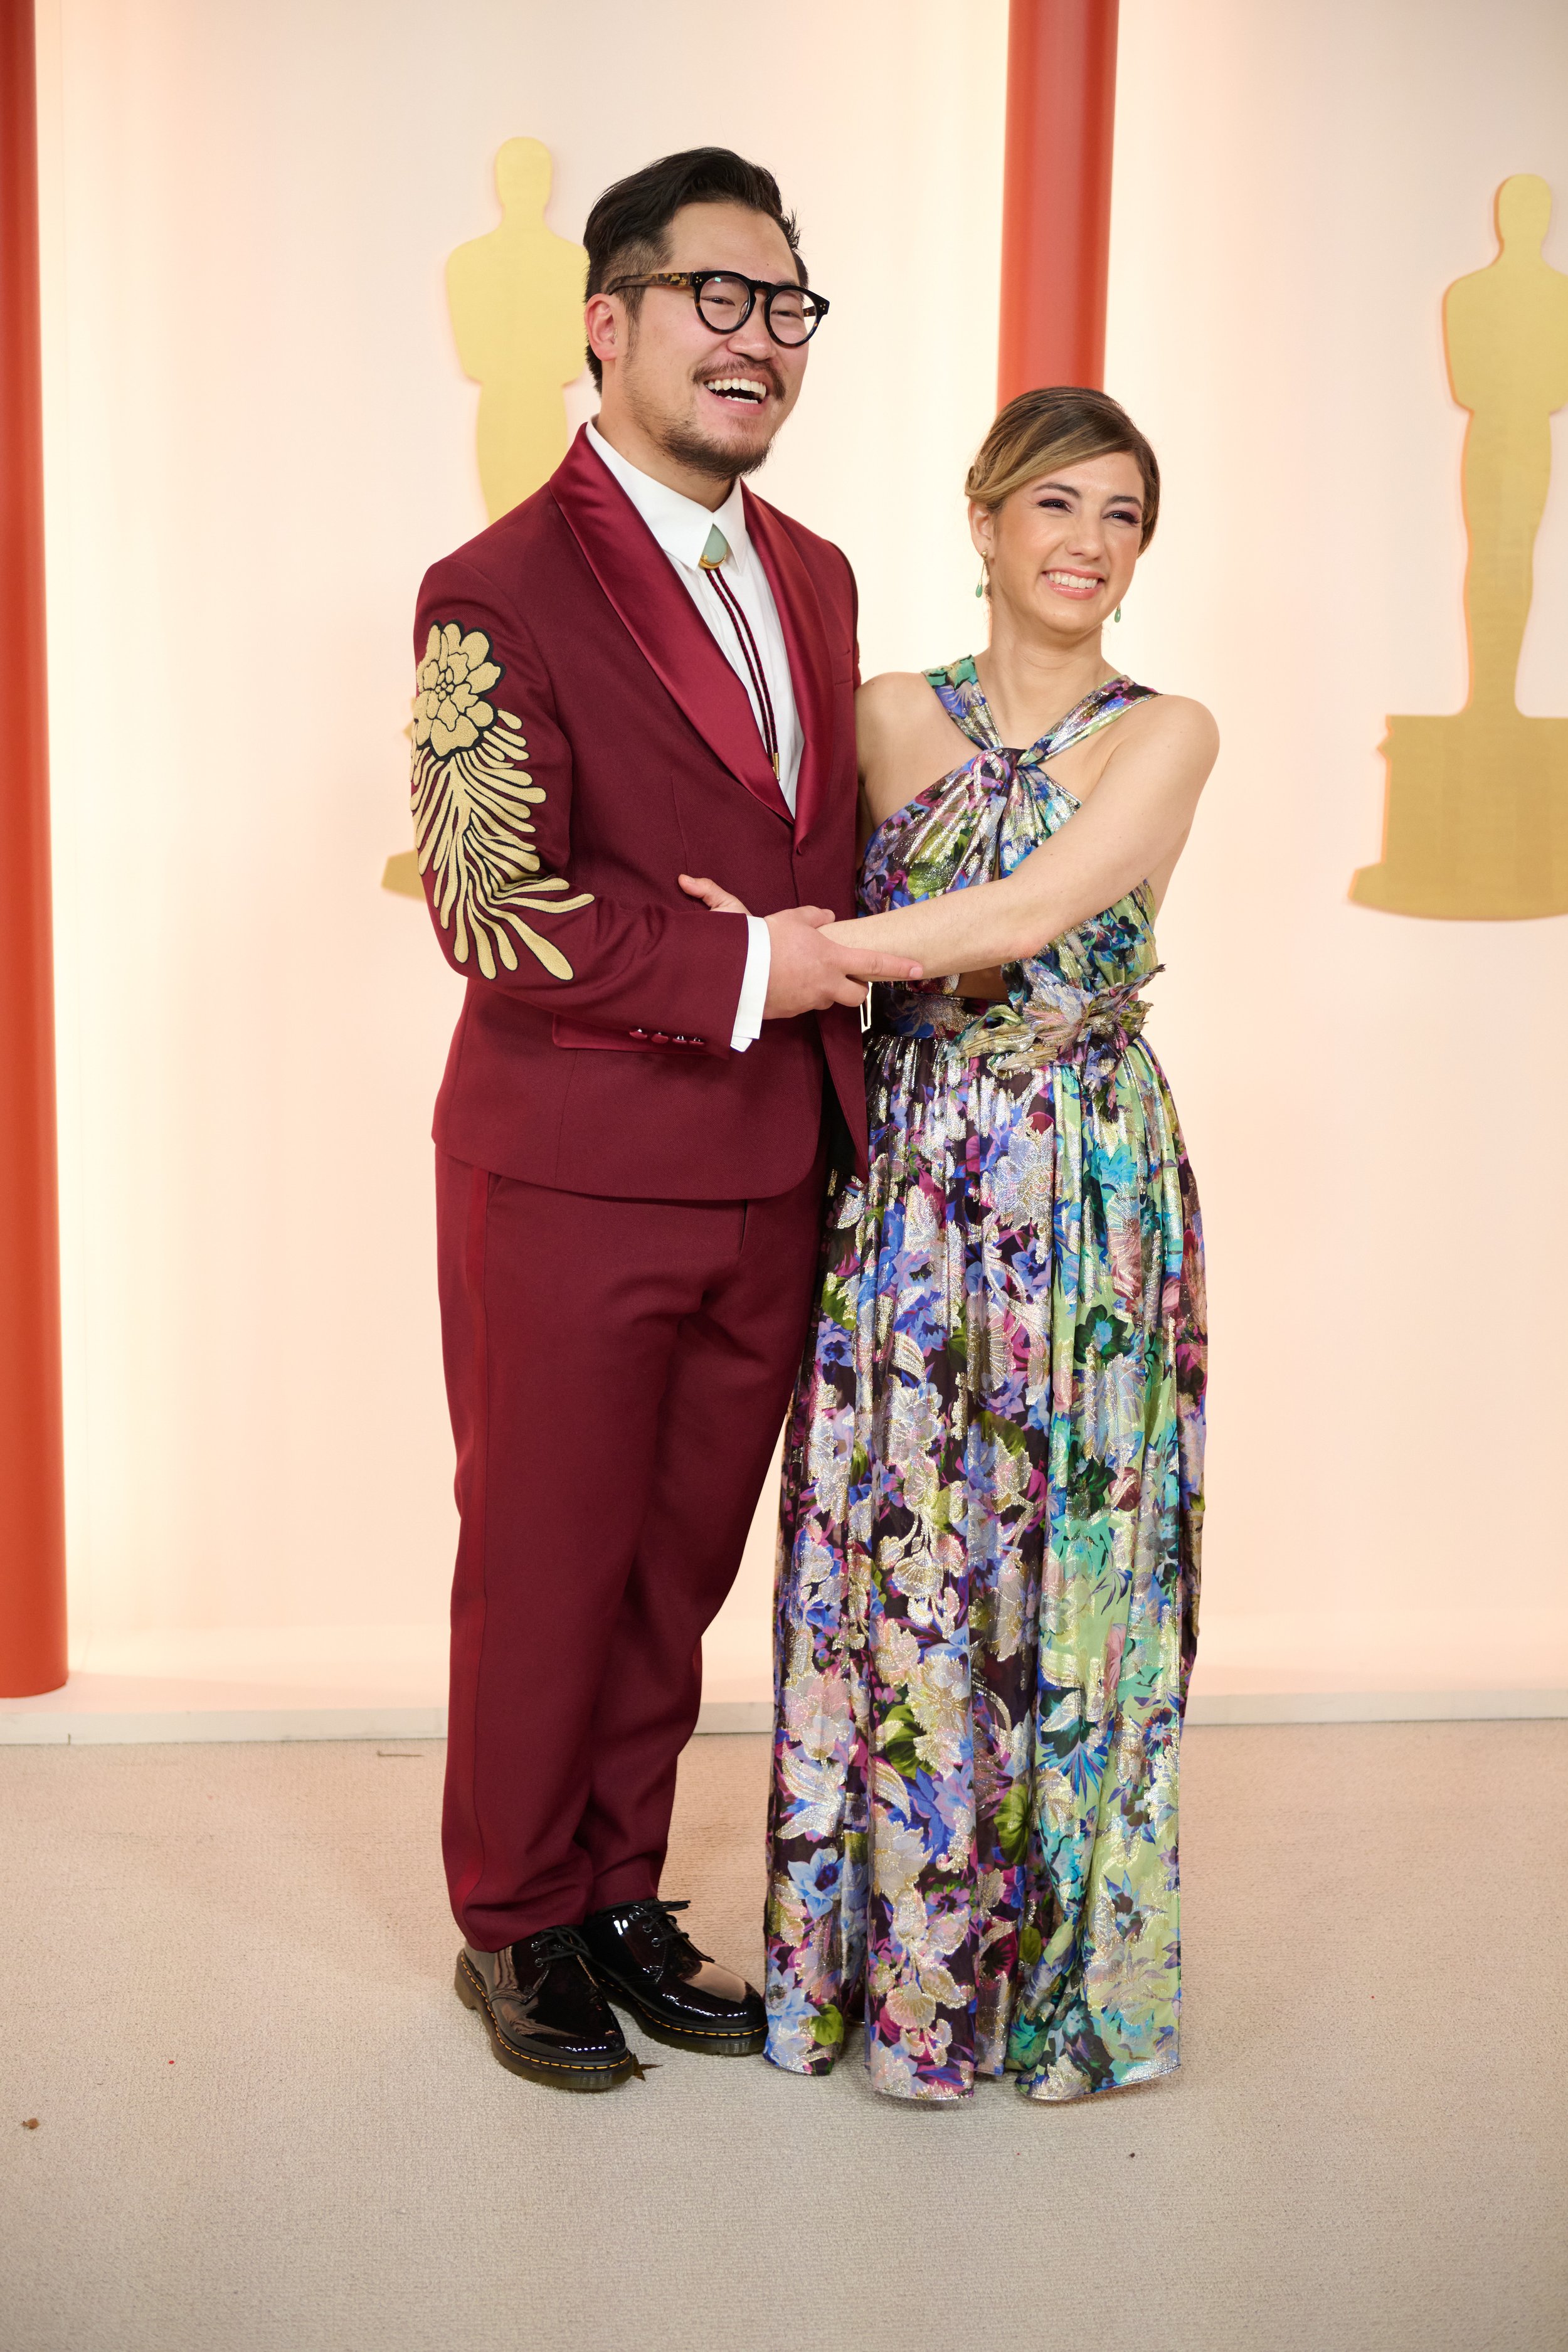 Oscar® nominee Daniel Kwan arrives with Kirsten Lepore on the red carpet of The 95th Oscars